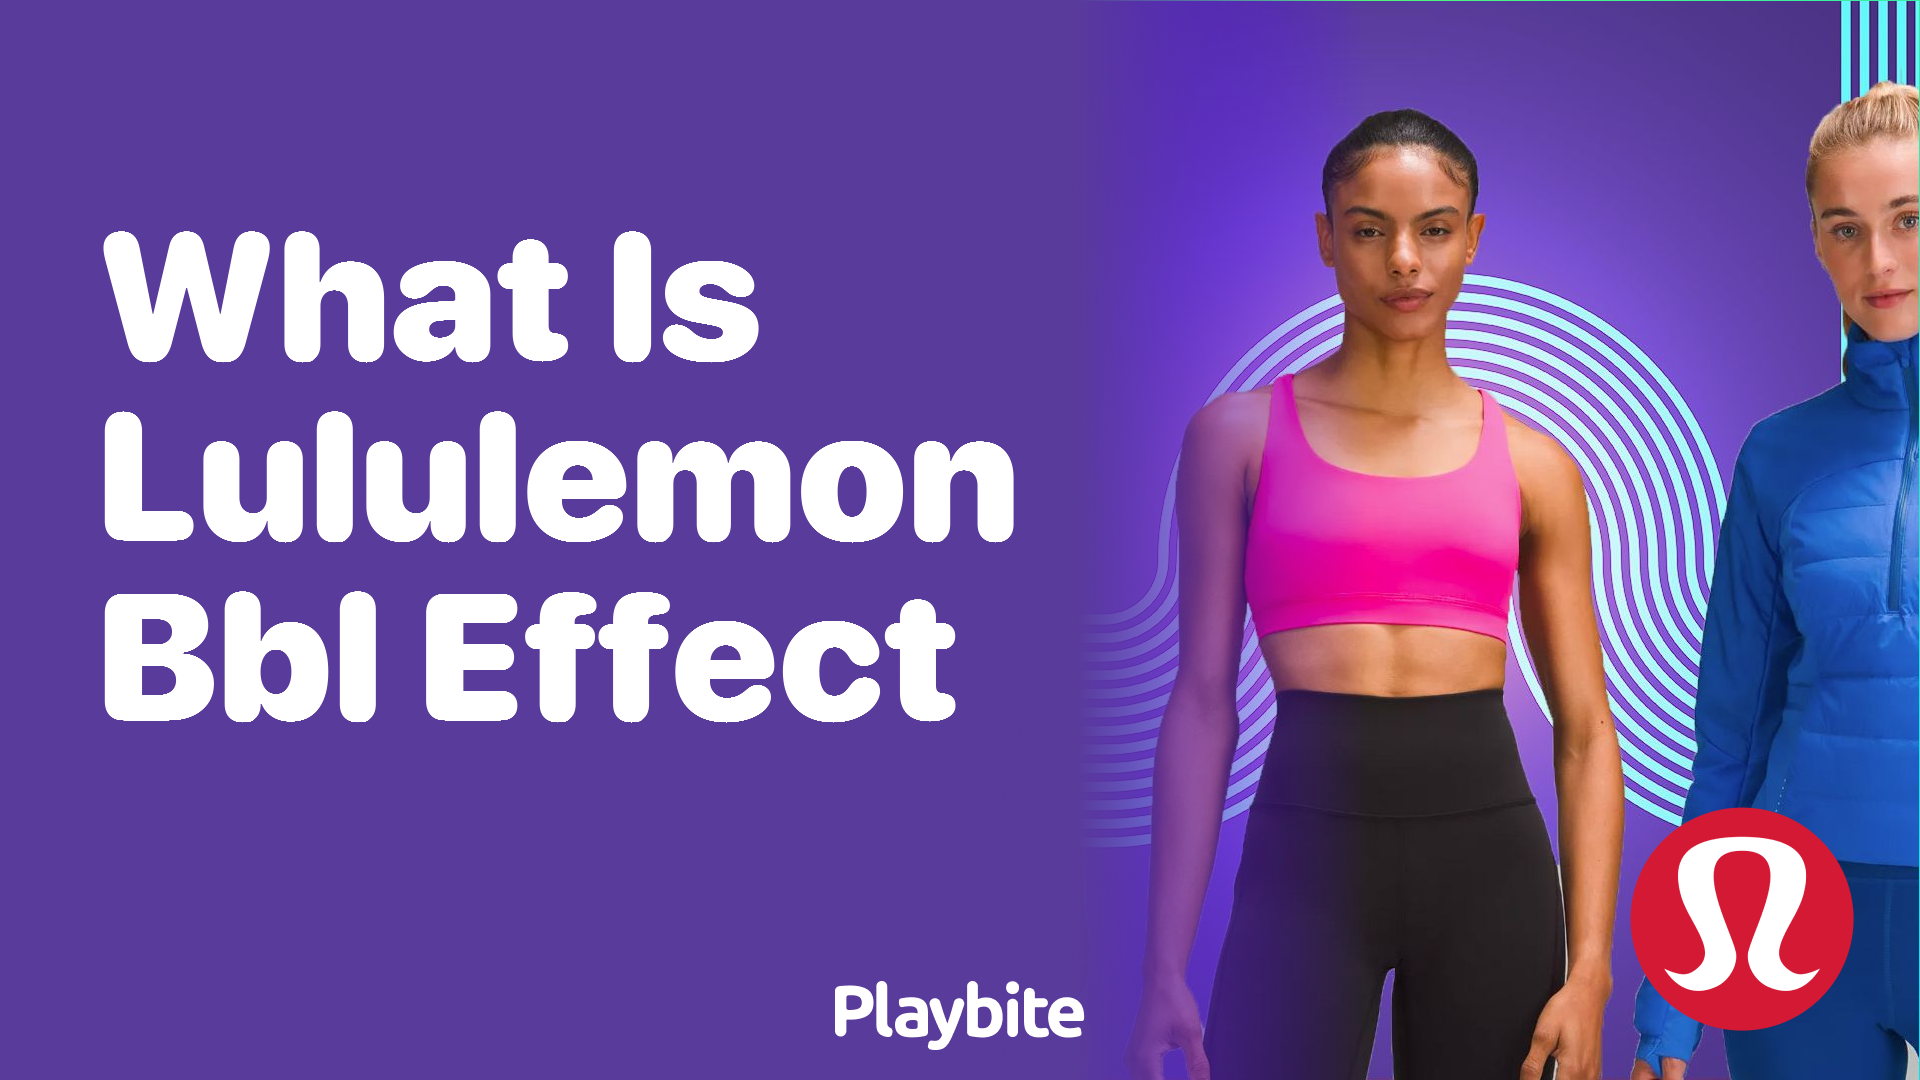 What is the Lululemon BBL Effect? - Playbite